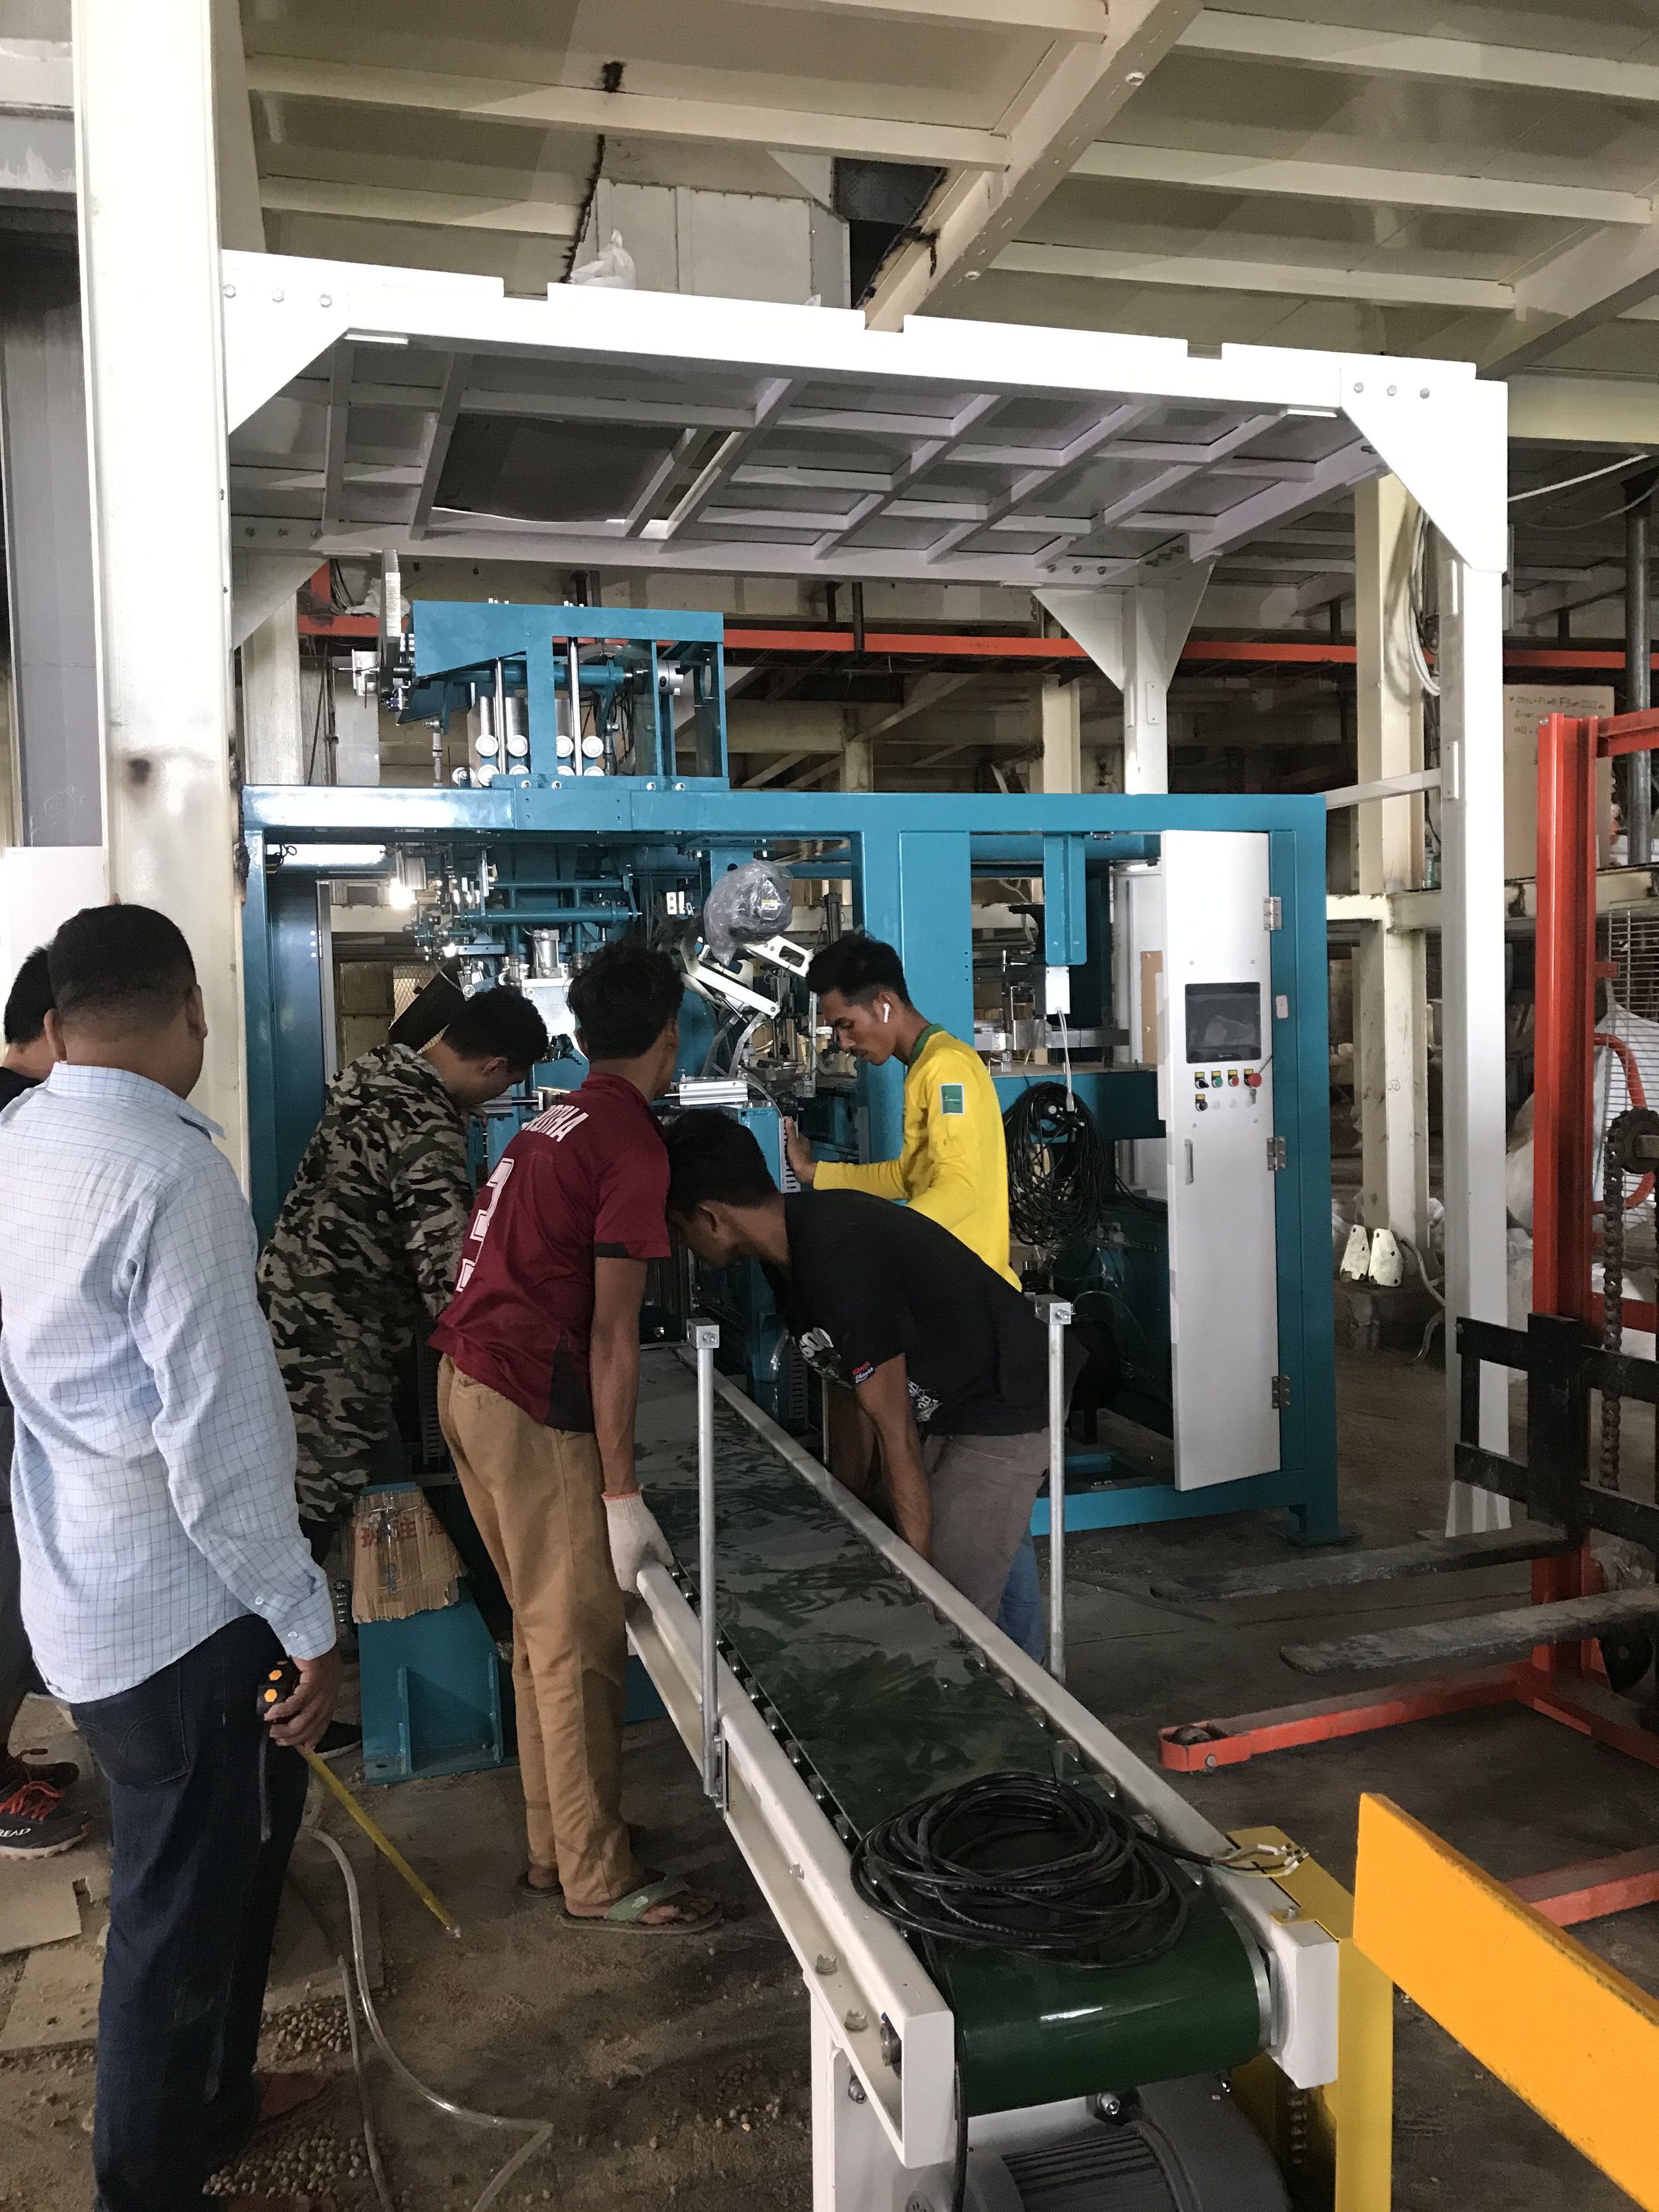 25-50KG bag Automatic bagging machine for NPK and Urea fertilizers full automatic packaging line full automatic fertilizers bagging palletizing and wrapping system